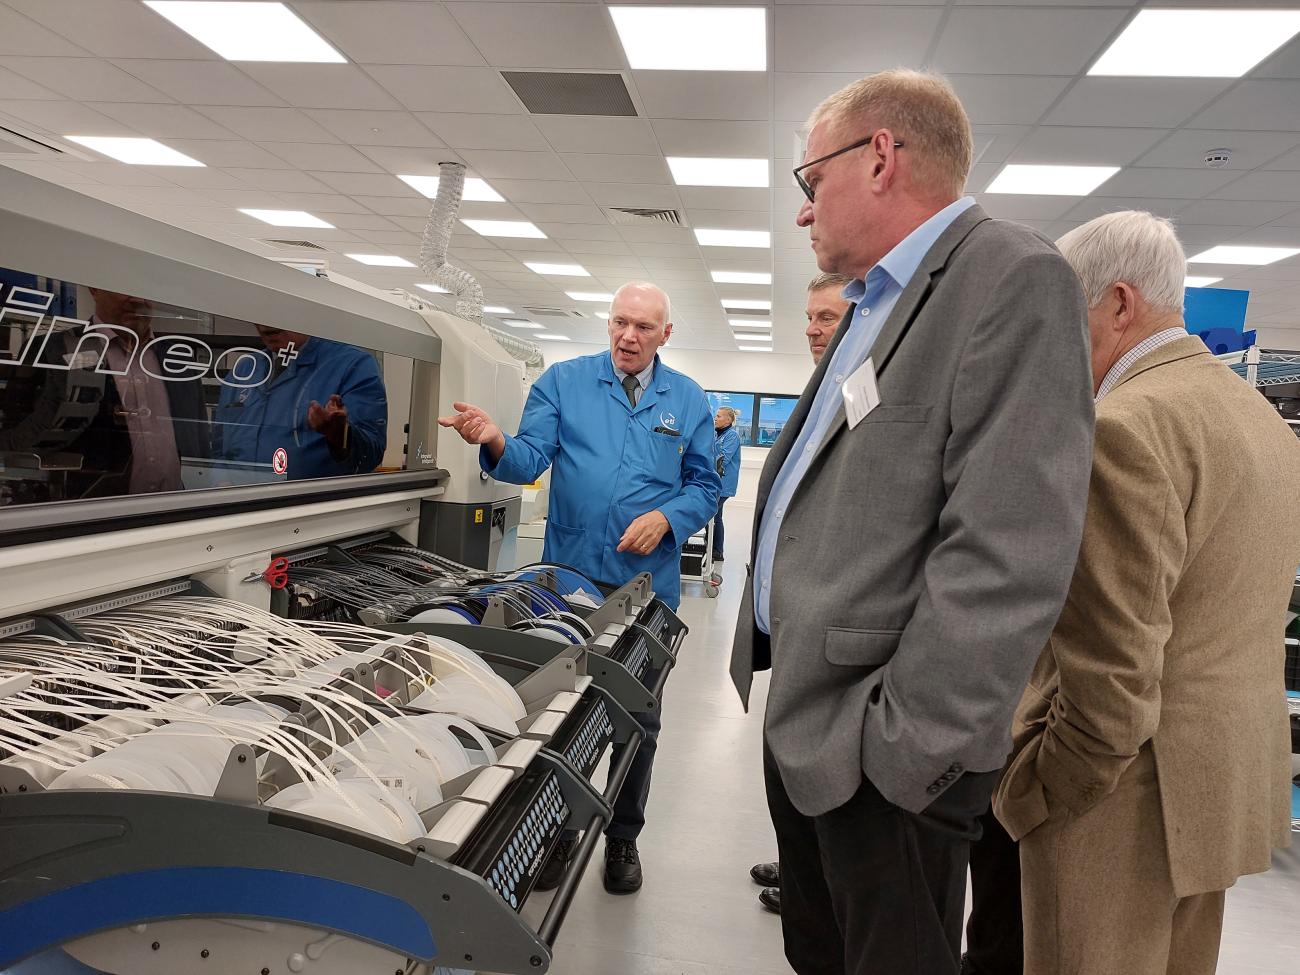 Guests receive exclusive tour of ETL's new C4 facility